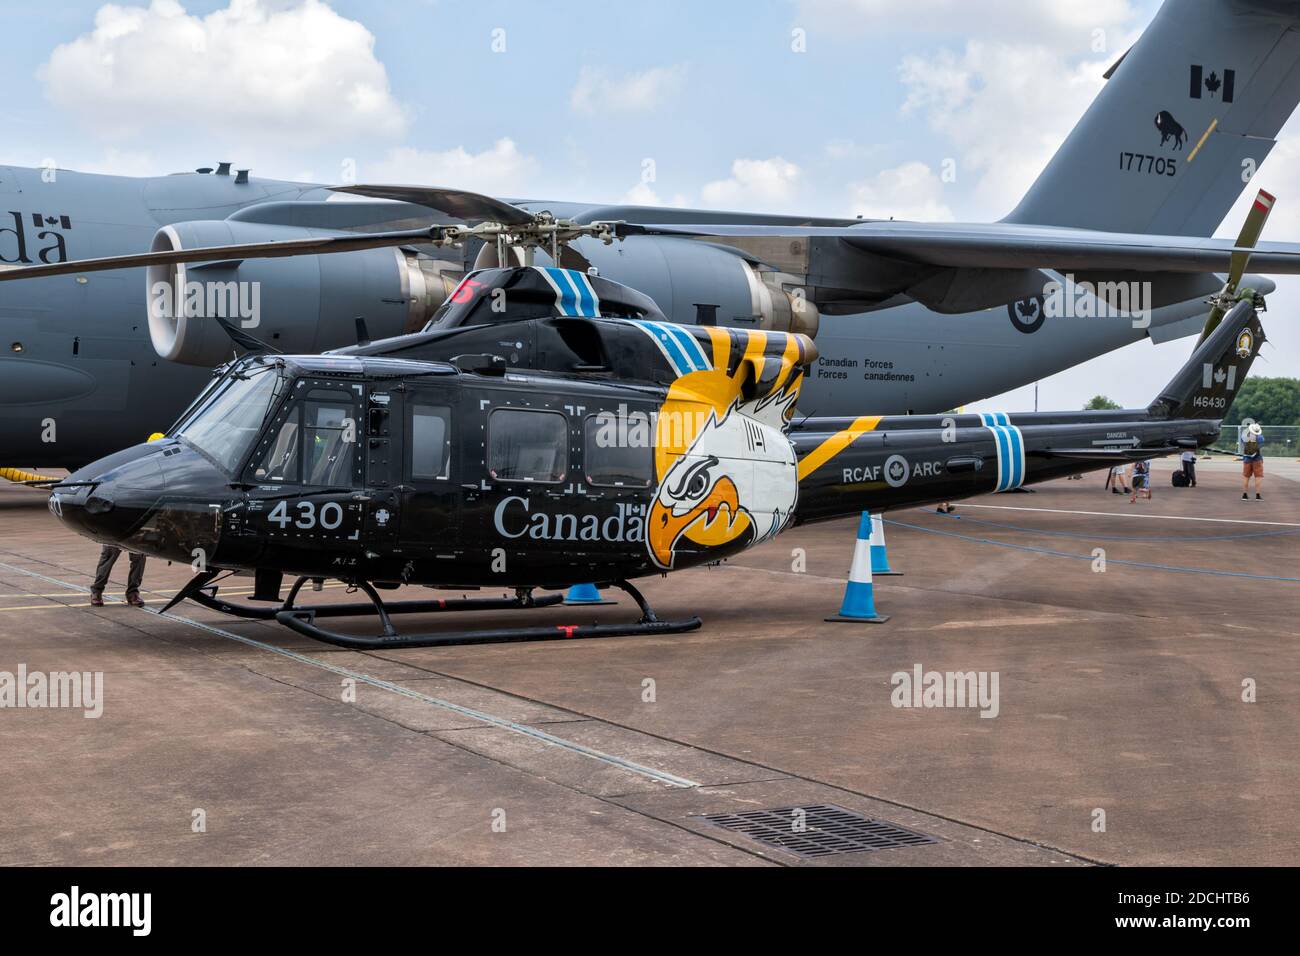 Bell CH-146 Griffon helicopter of the Canadian Armed Forces on the tarmac of RAF Fairford. UK - July 13, 2018 Stock Photo